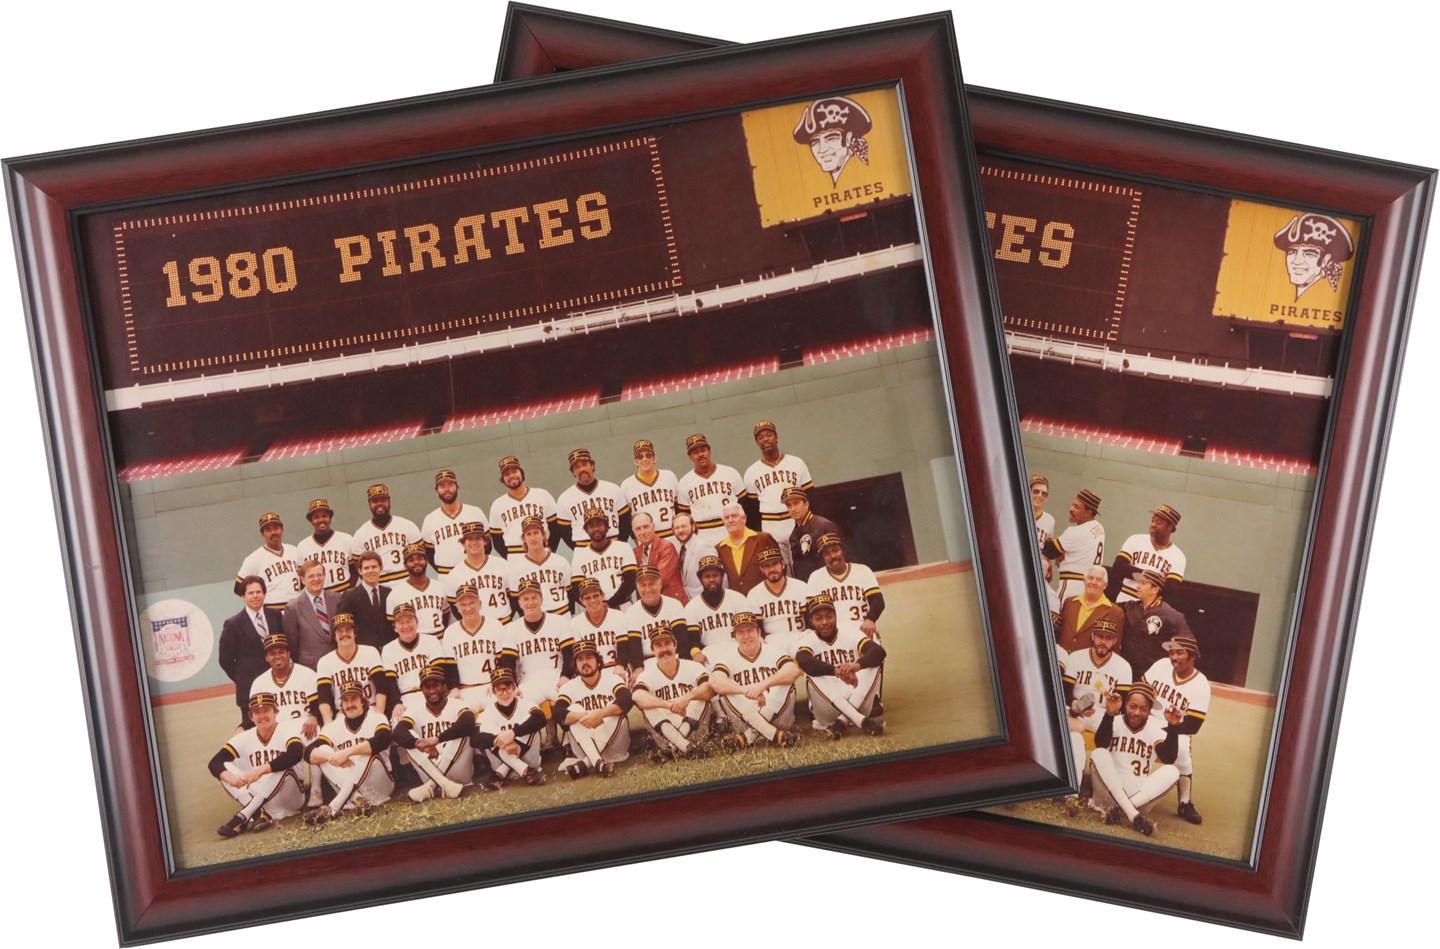 - 1980 Pittsburgh Pirates "Obscene" and Regular Large-Format Team Photographs (2)